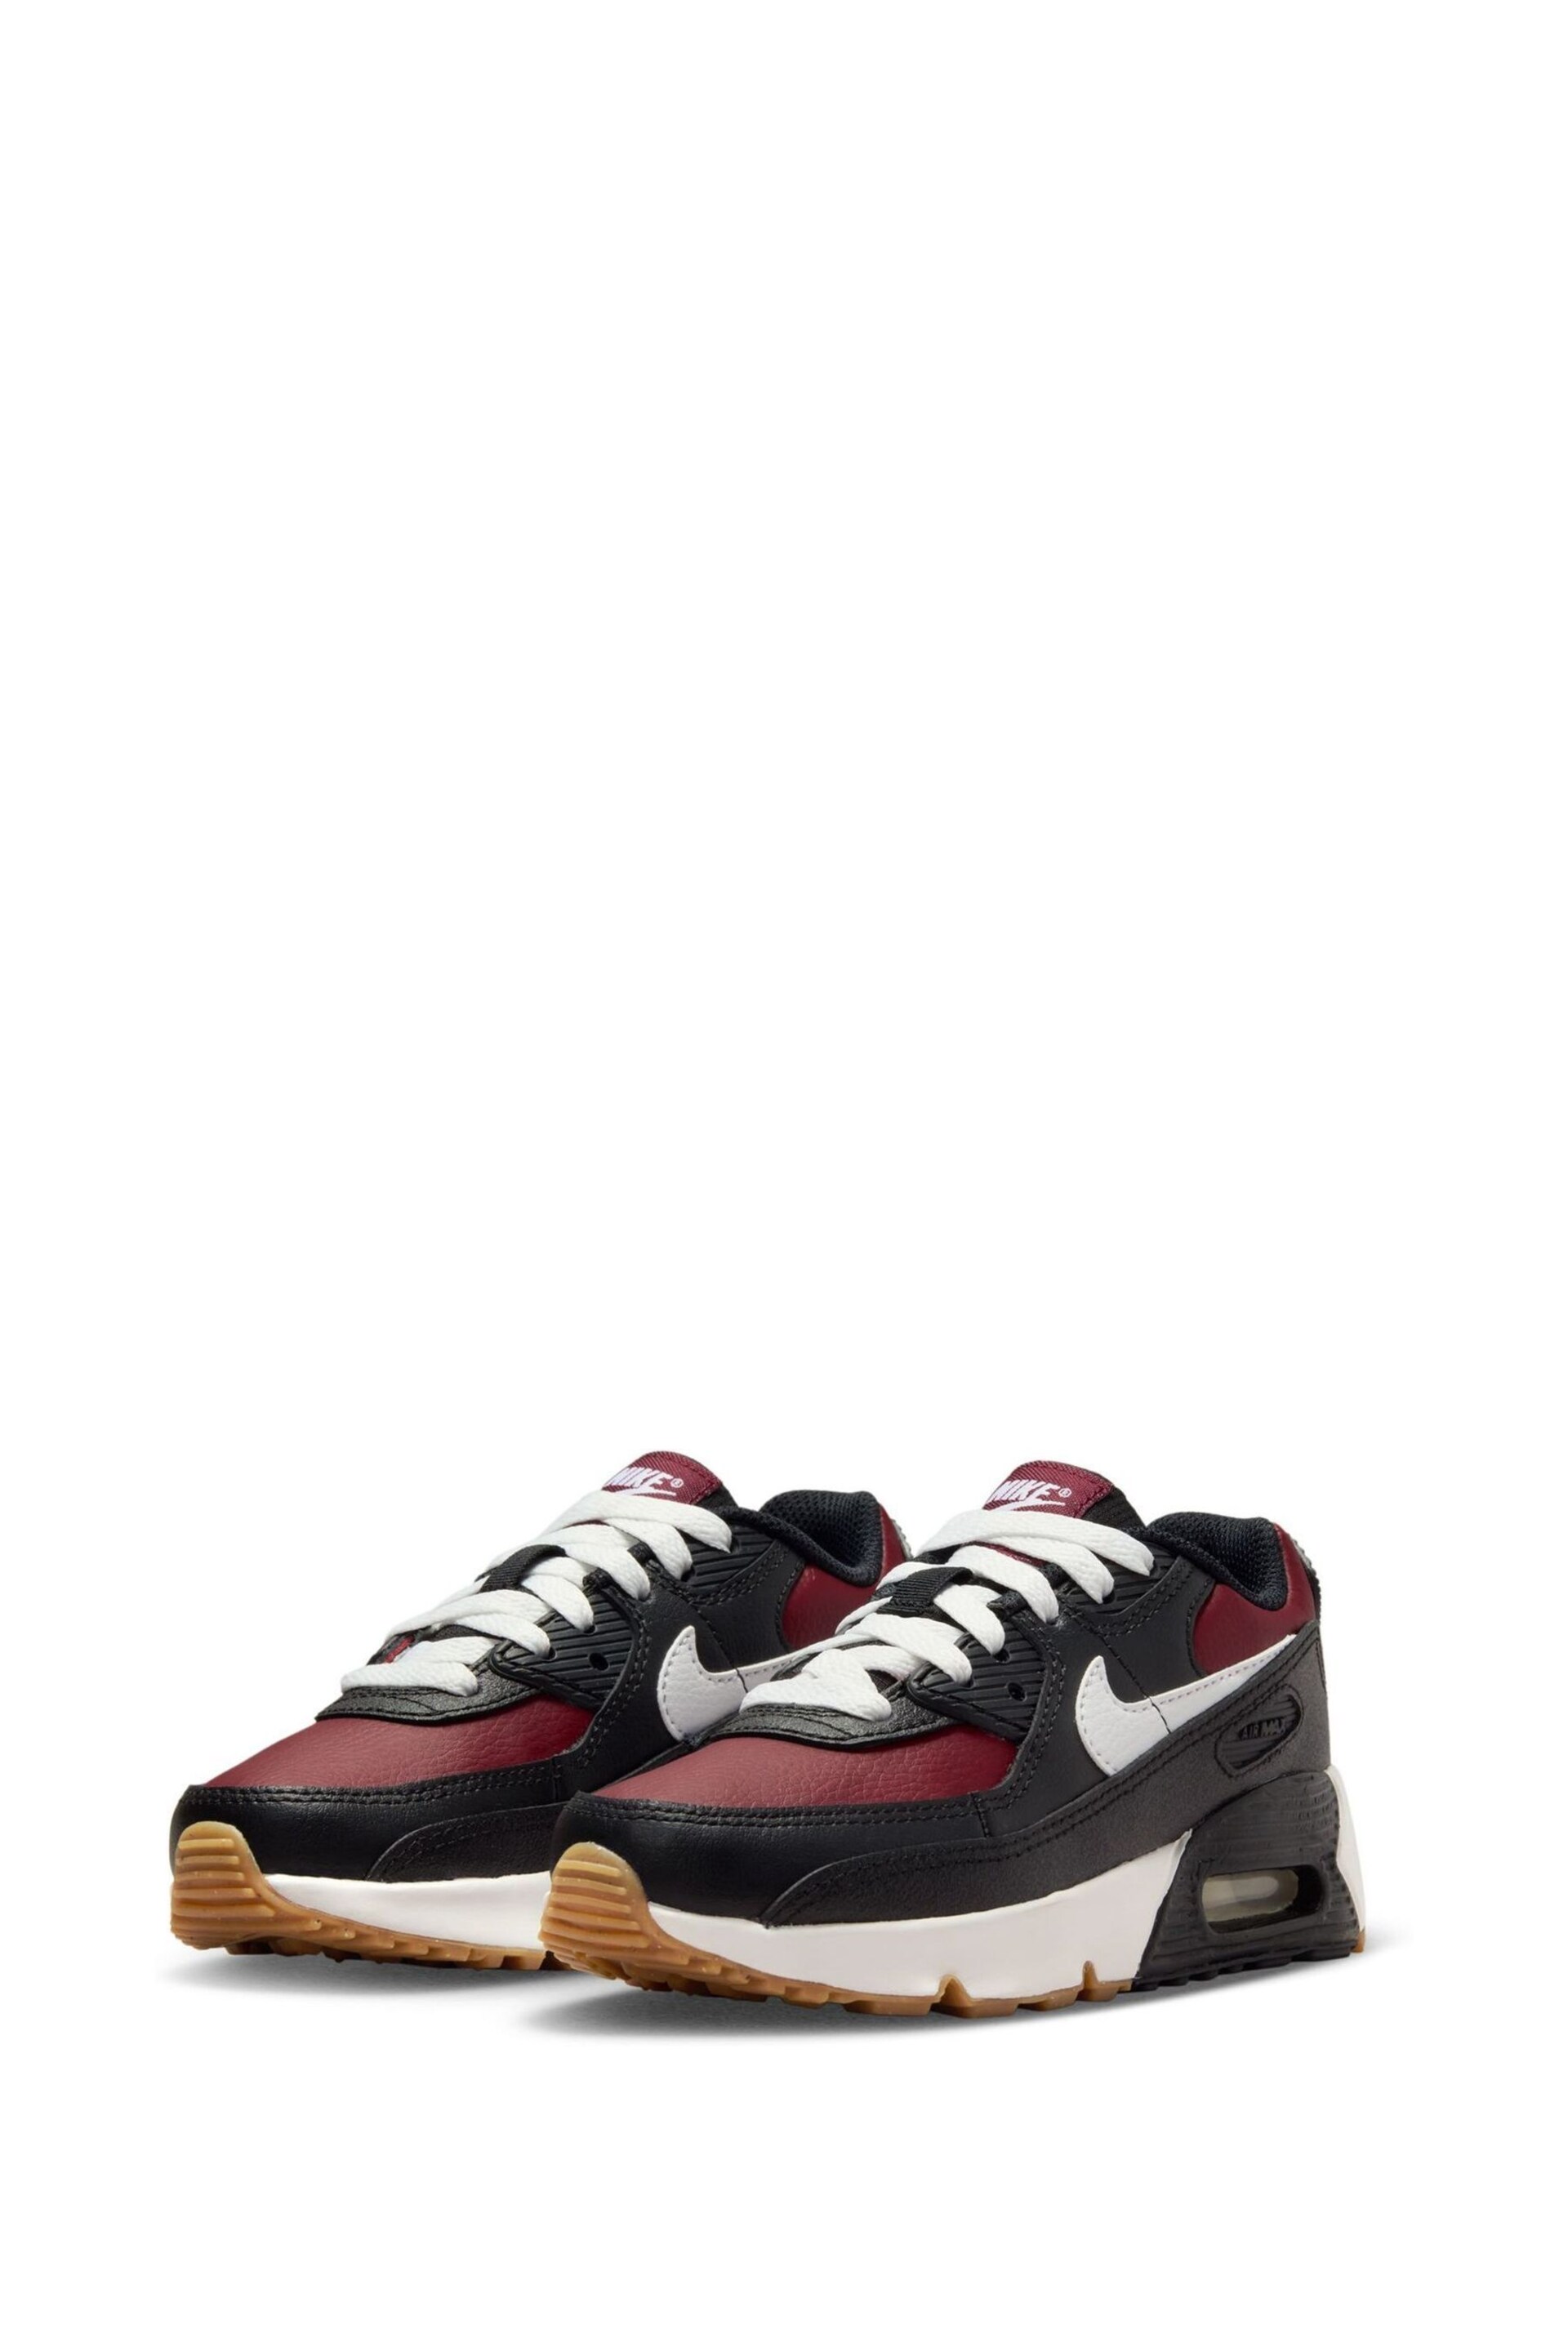 Nike Black/White/Red Air Max 90 Junior Trainers - Image 3 of 8